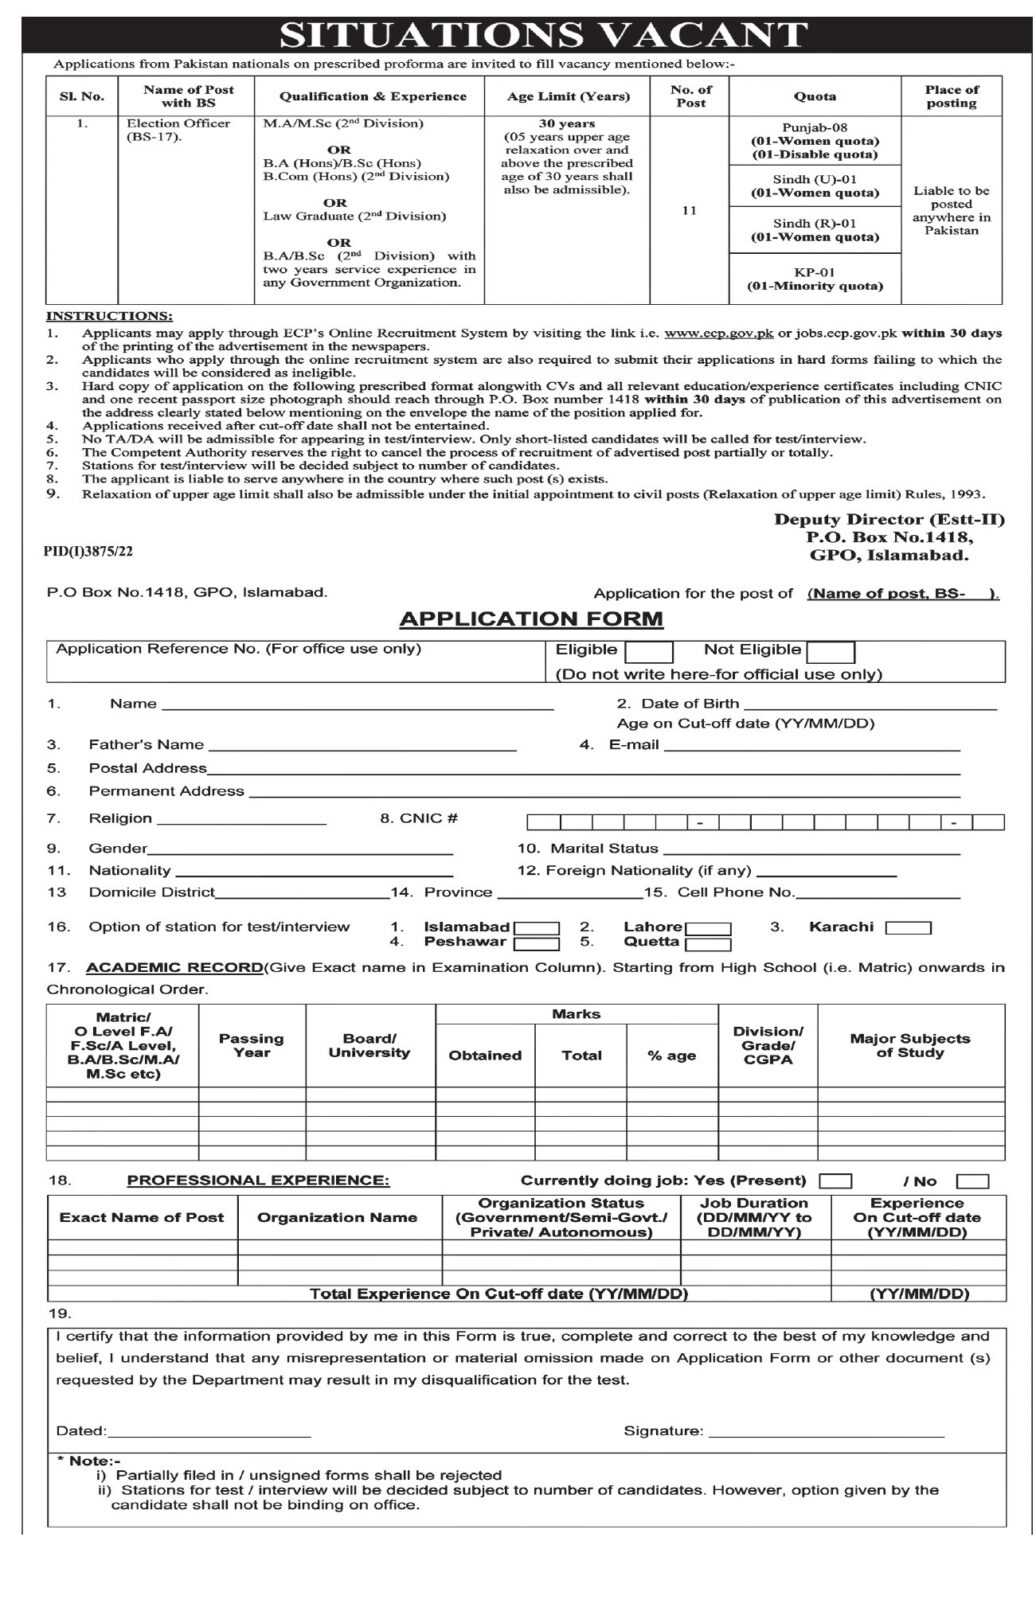 Jobs at Election Commission of Pakistan 2023